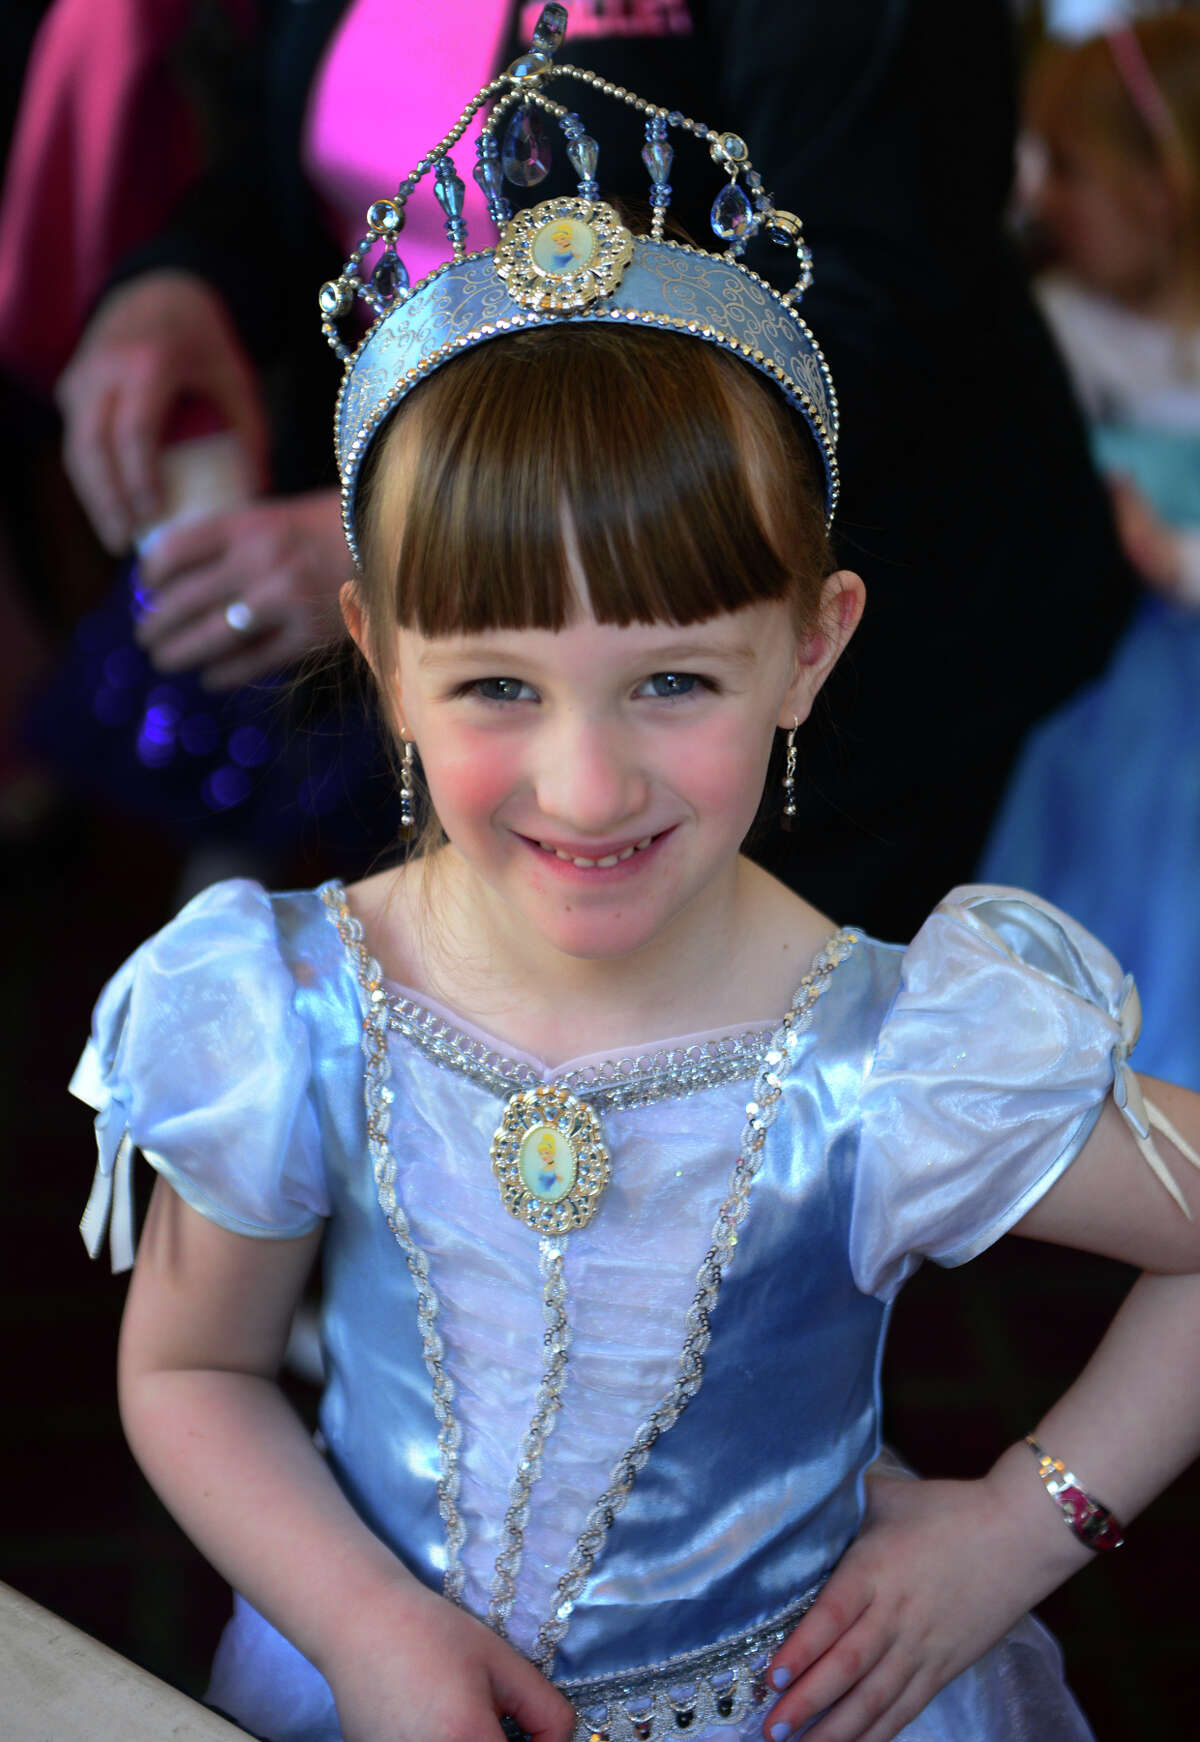 Morgan Robinson, 4, of Naugatuck, is dressed up as a princess for New England Ballet Company's "Ballerina Princess Party" held at the Bijou Theater in downtown Bridgeport, Conn. on Saturday March 22, 2014.